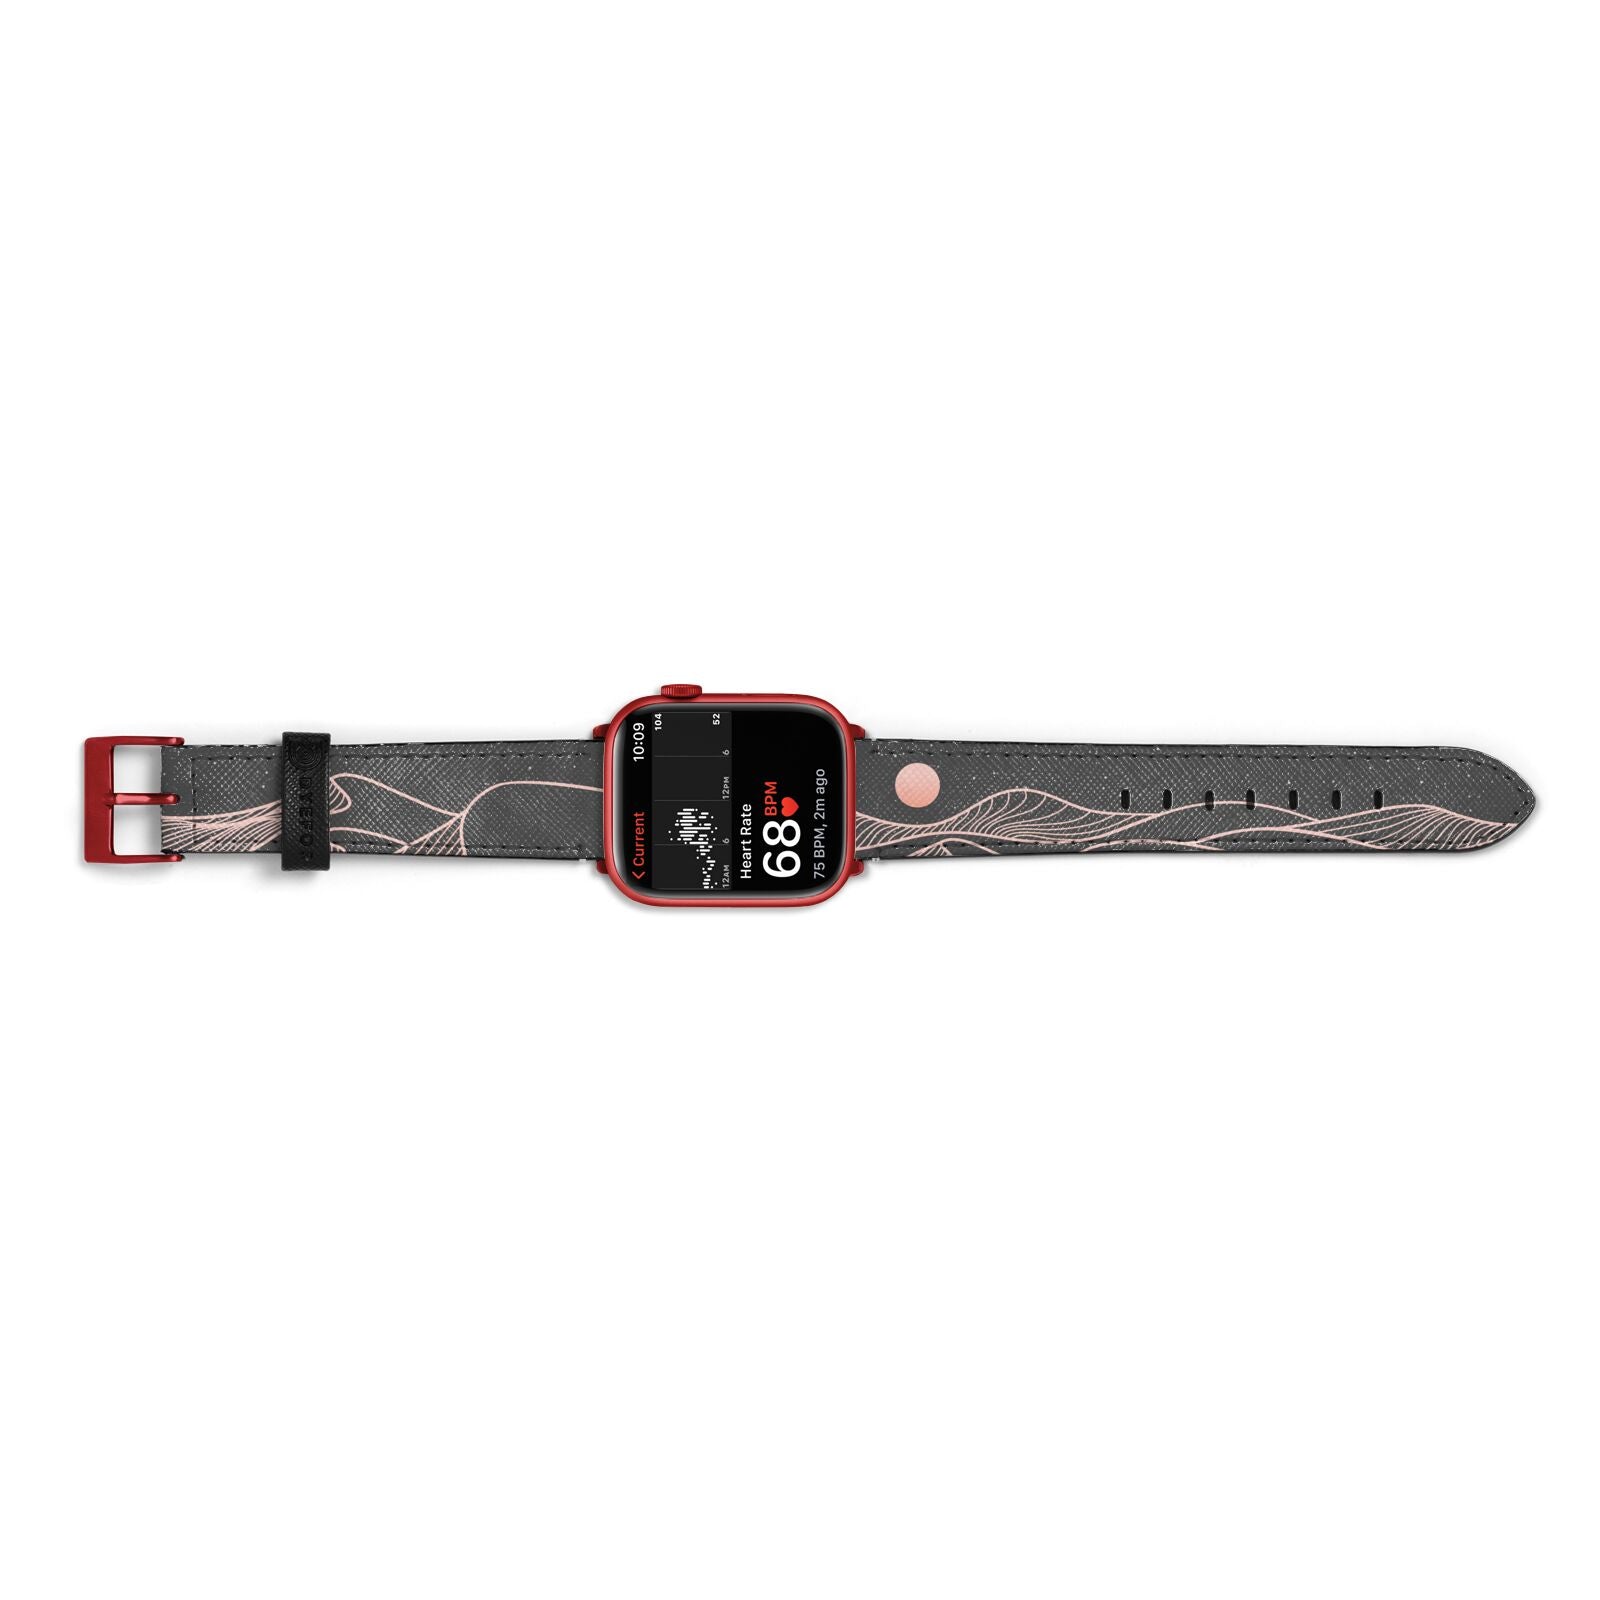 Abstract Sunset Apple Watch Strap Size 38mm Landscape Image Red Hardware